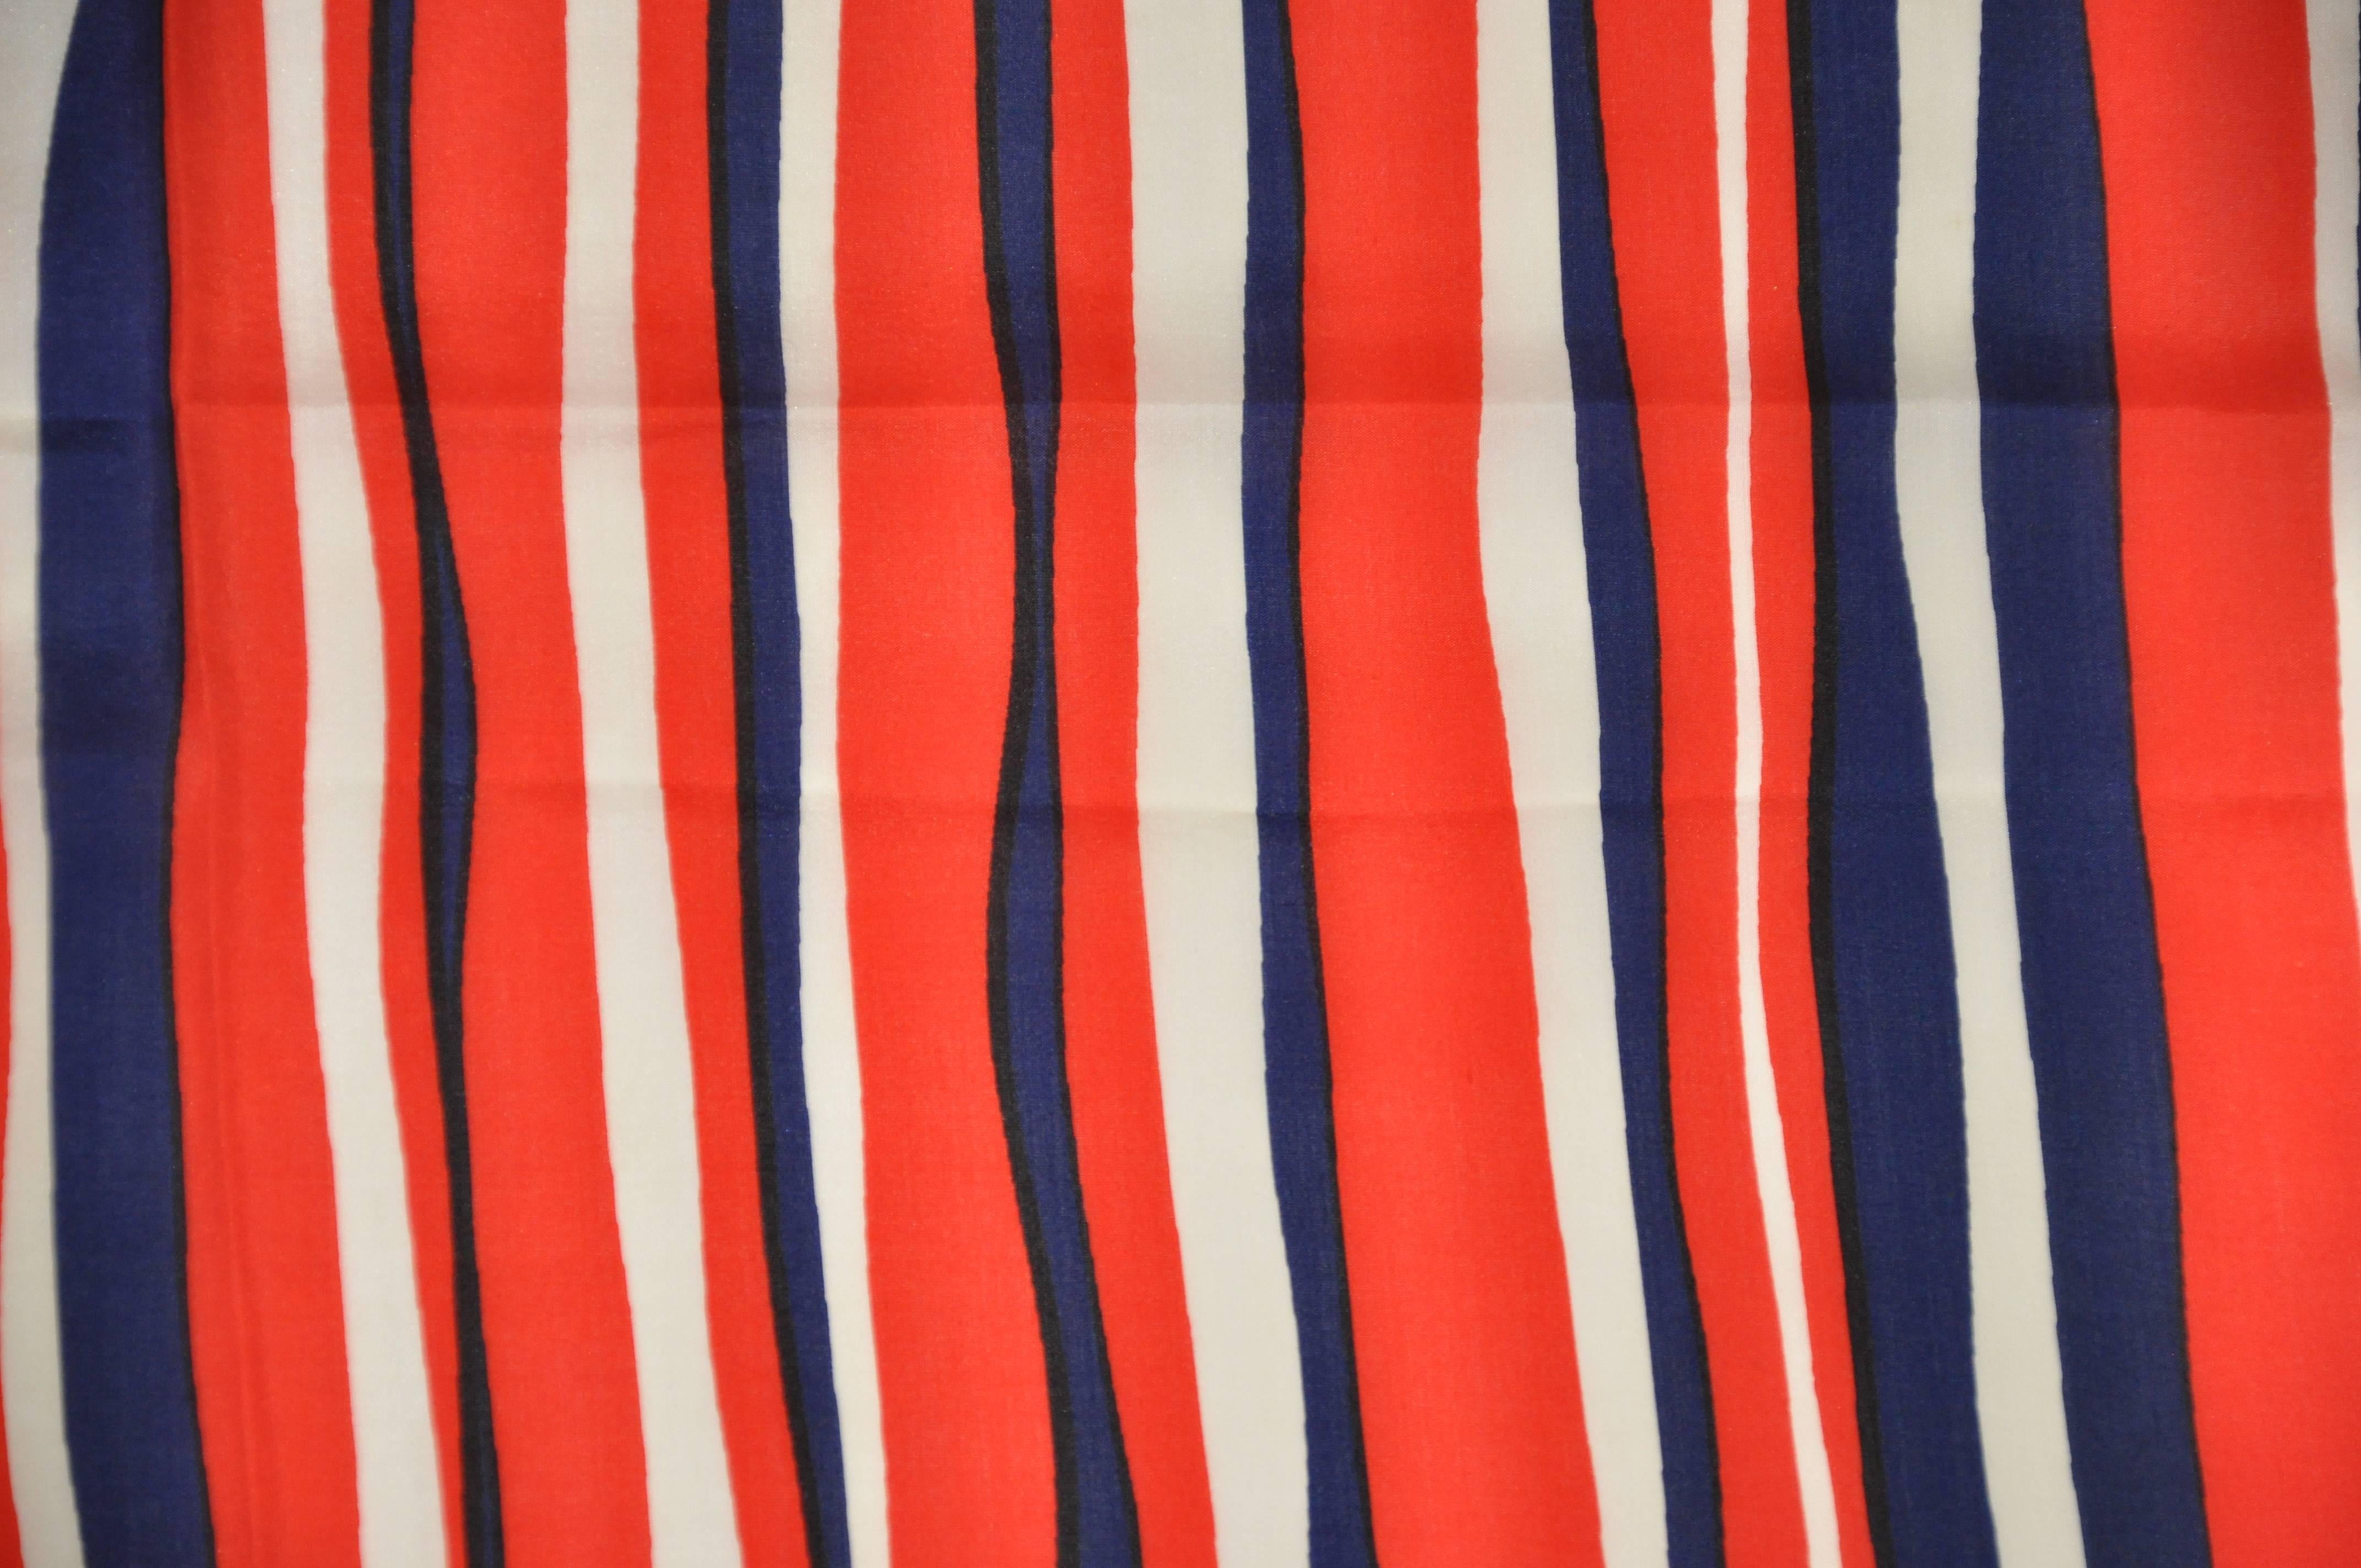 Michael Murray wonderful and glorious red white and blue silk scarf measures 20